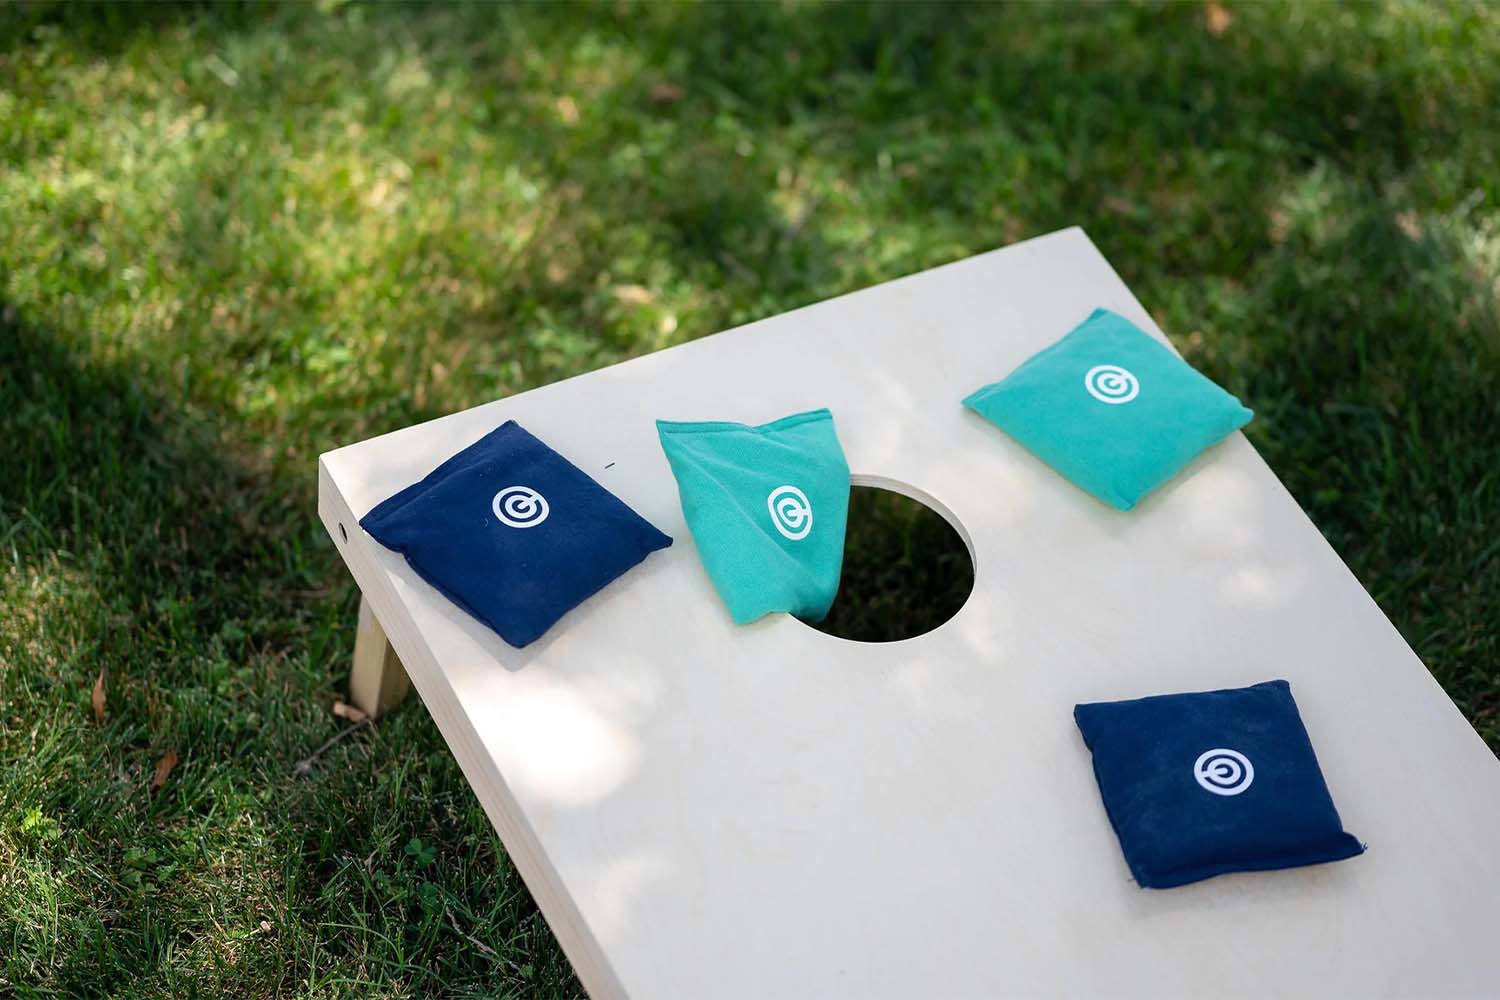 6 Different Ways To Play Bean Bag Toss Games